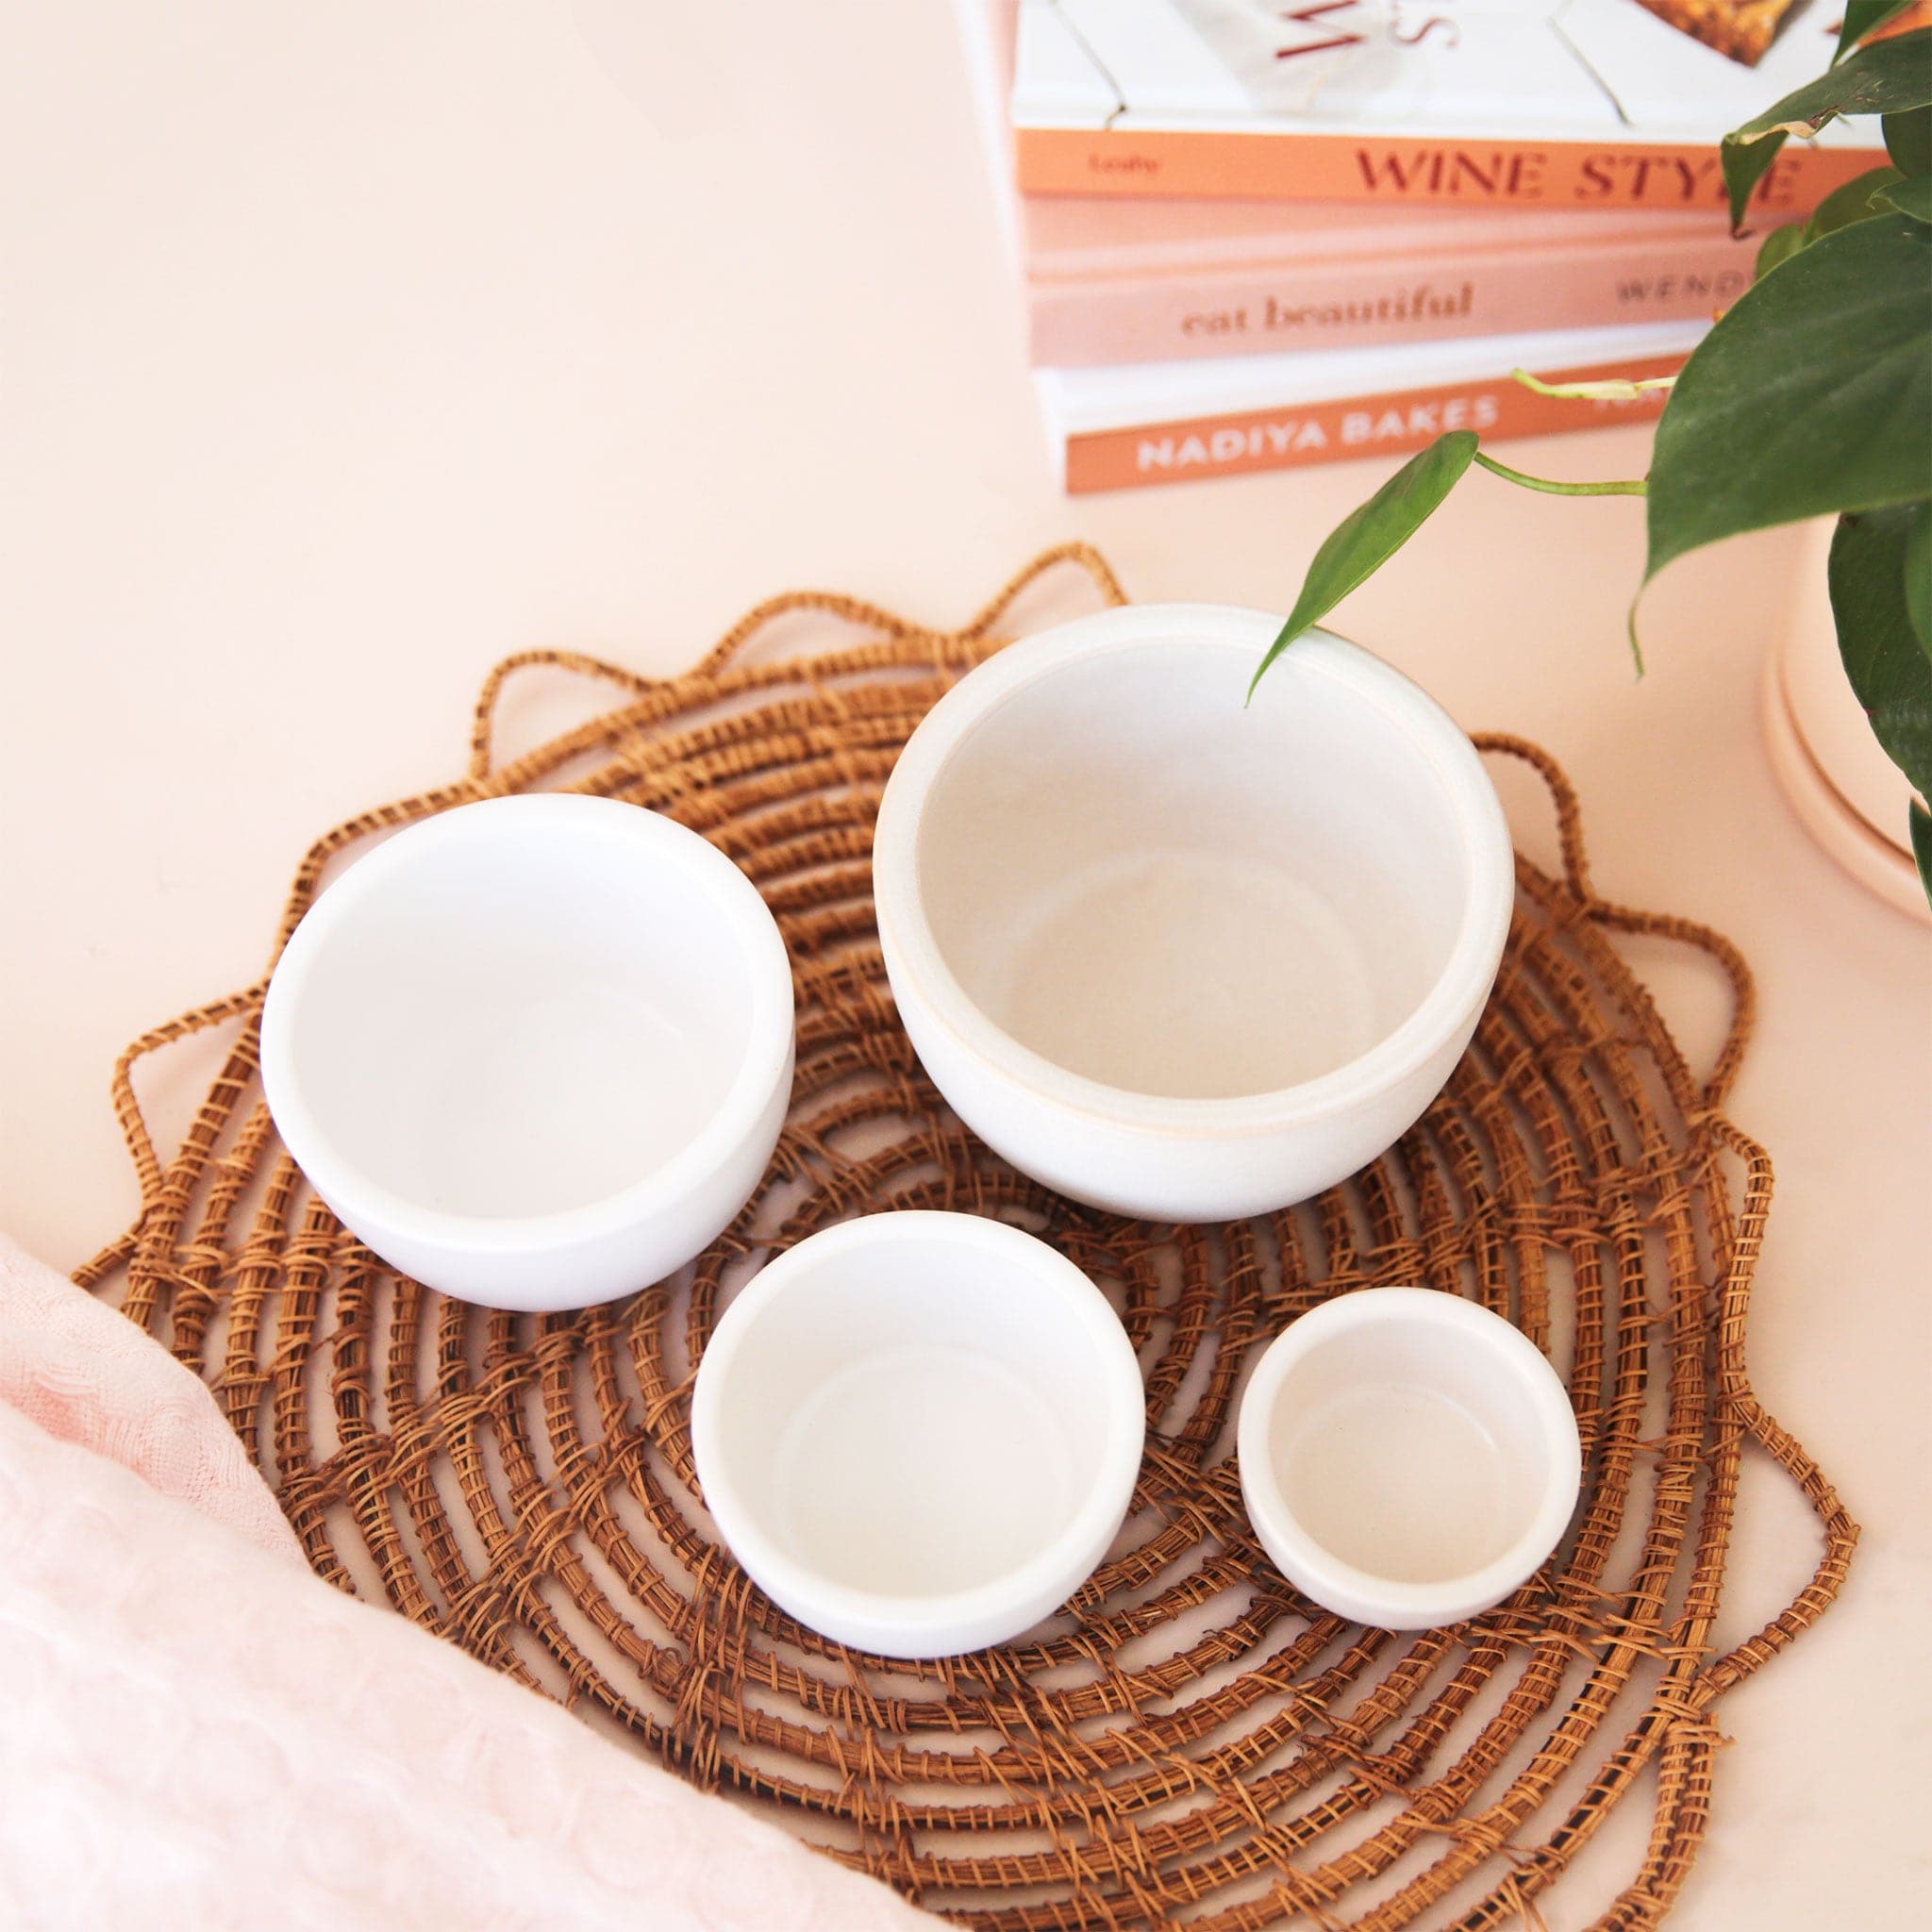 Four white ceramic bowls that nest perfectly inside one another.